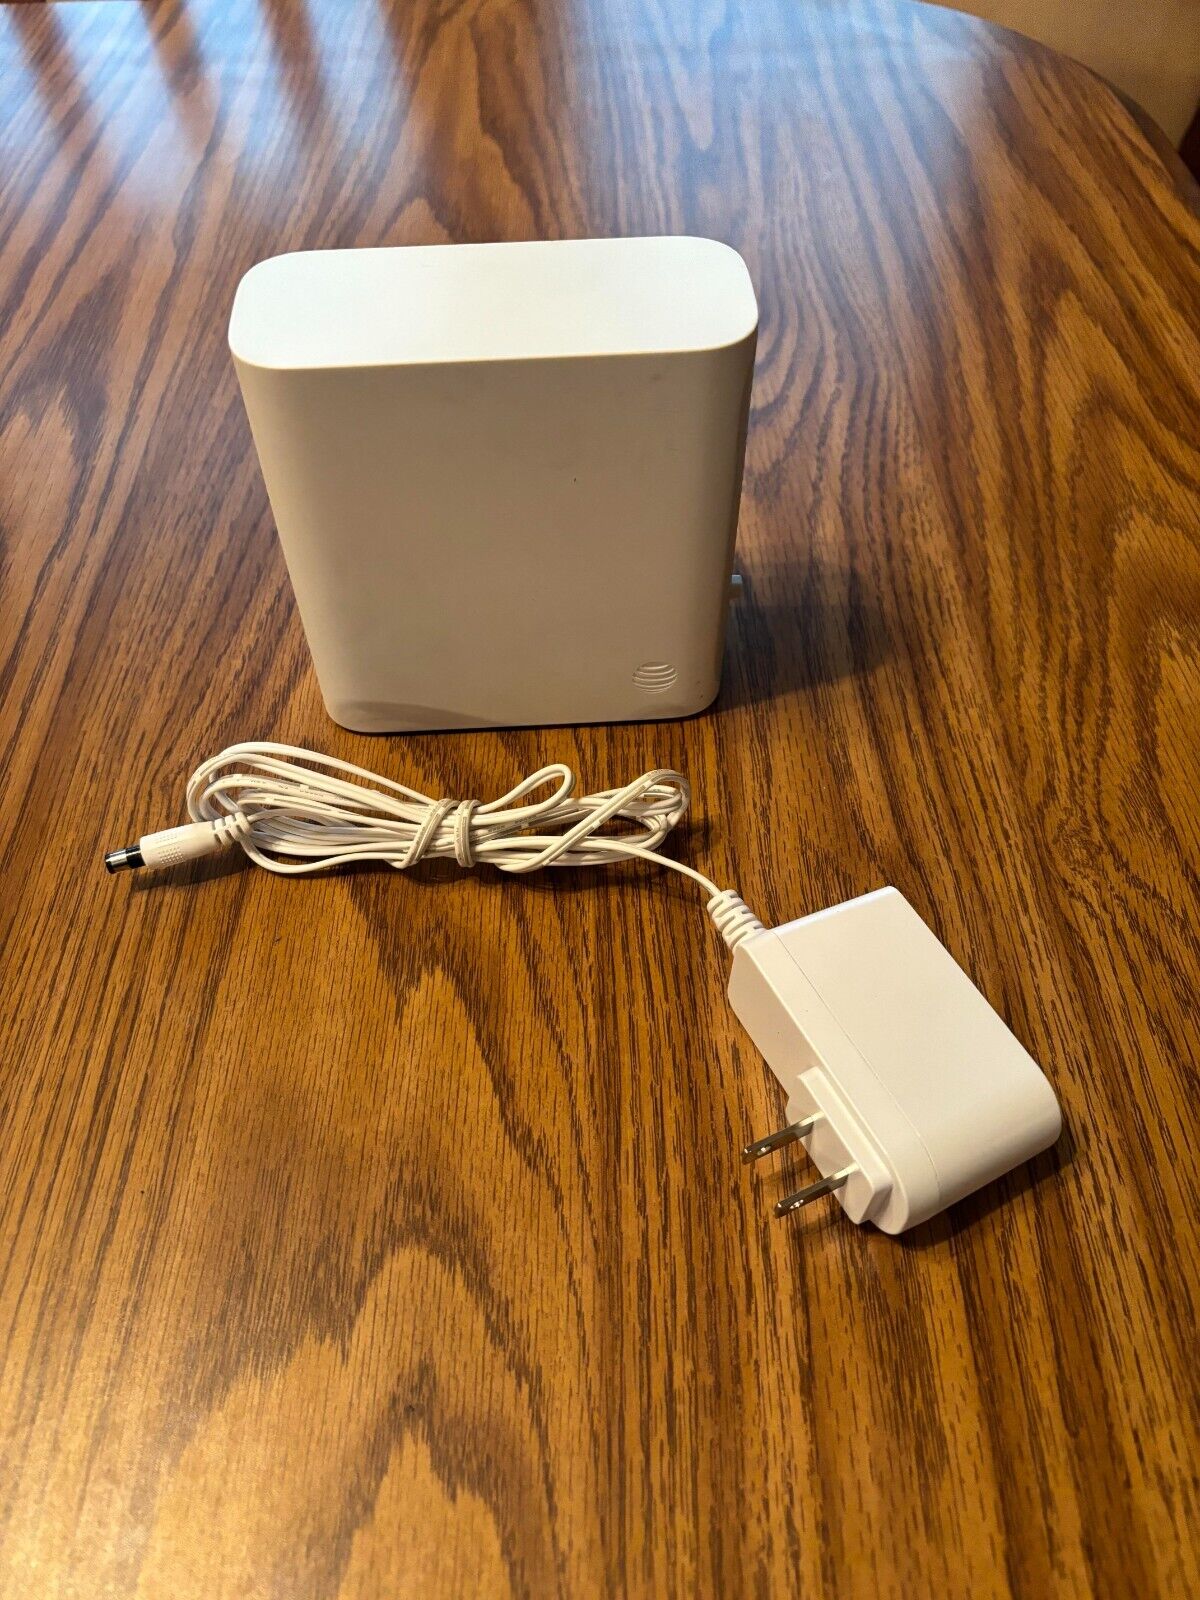 AT&T Airties Air 4921 1600Mbps Dual Band Smart Wi-Fi Extender - White